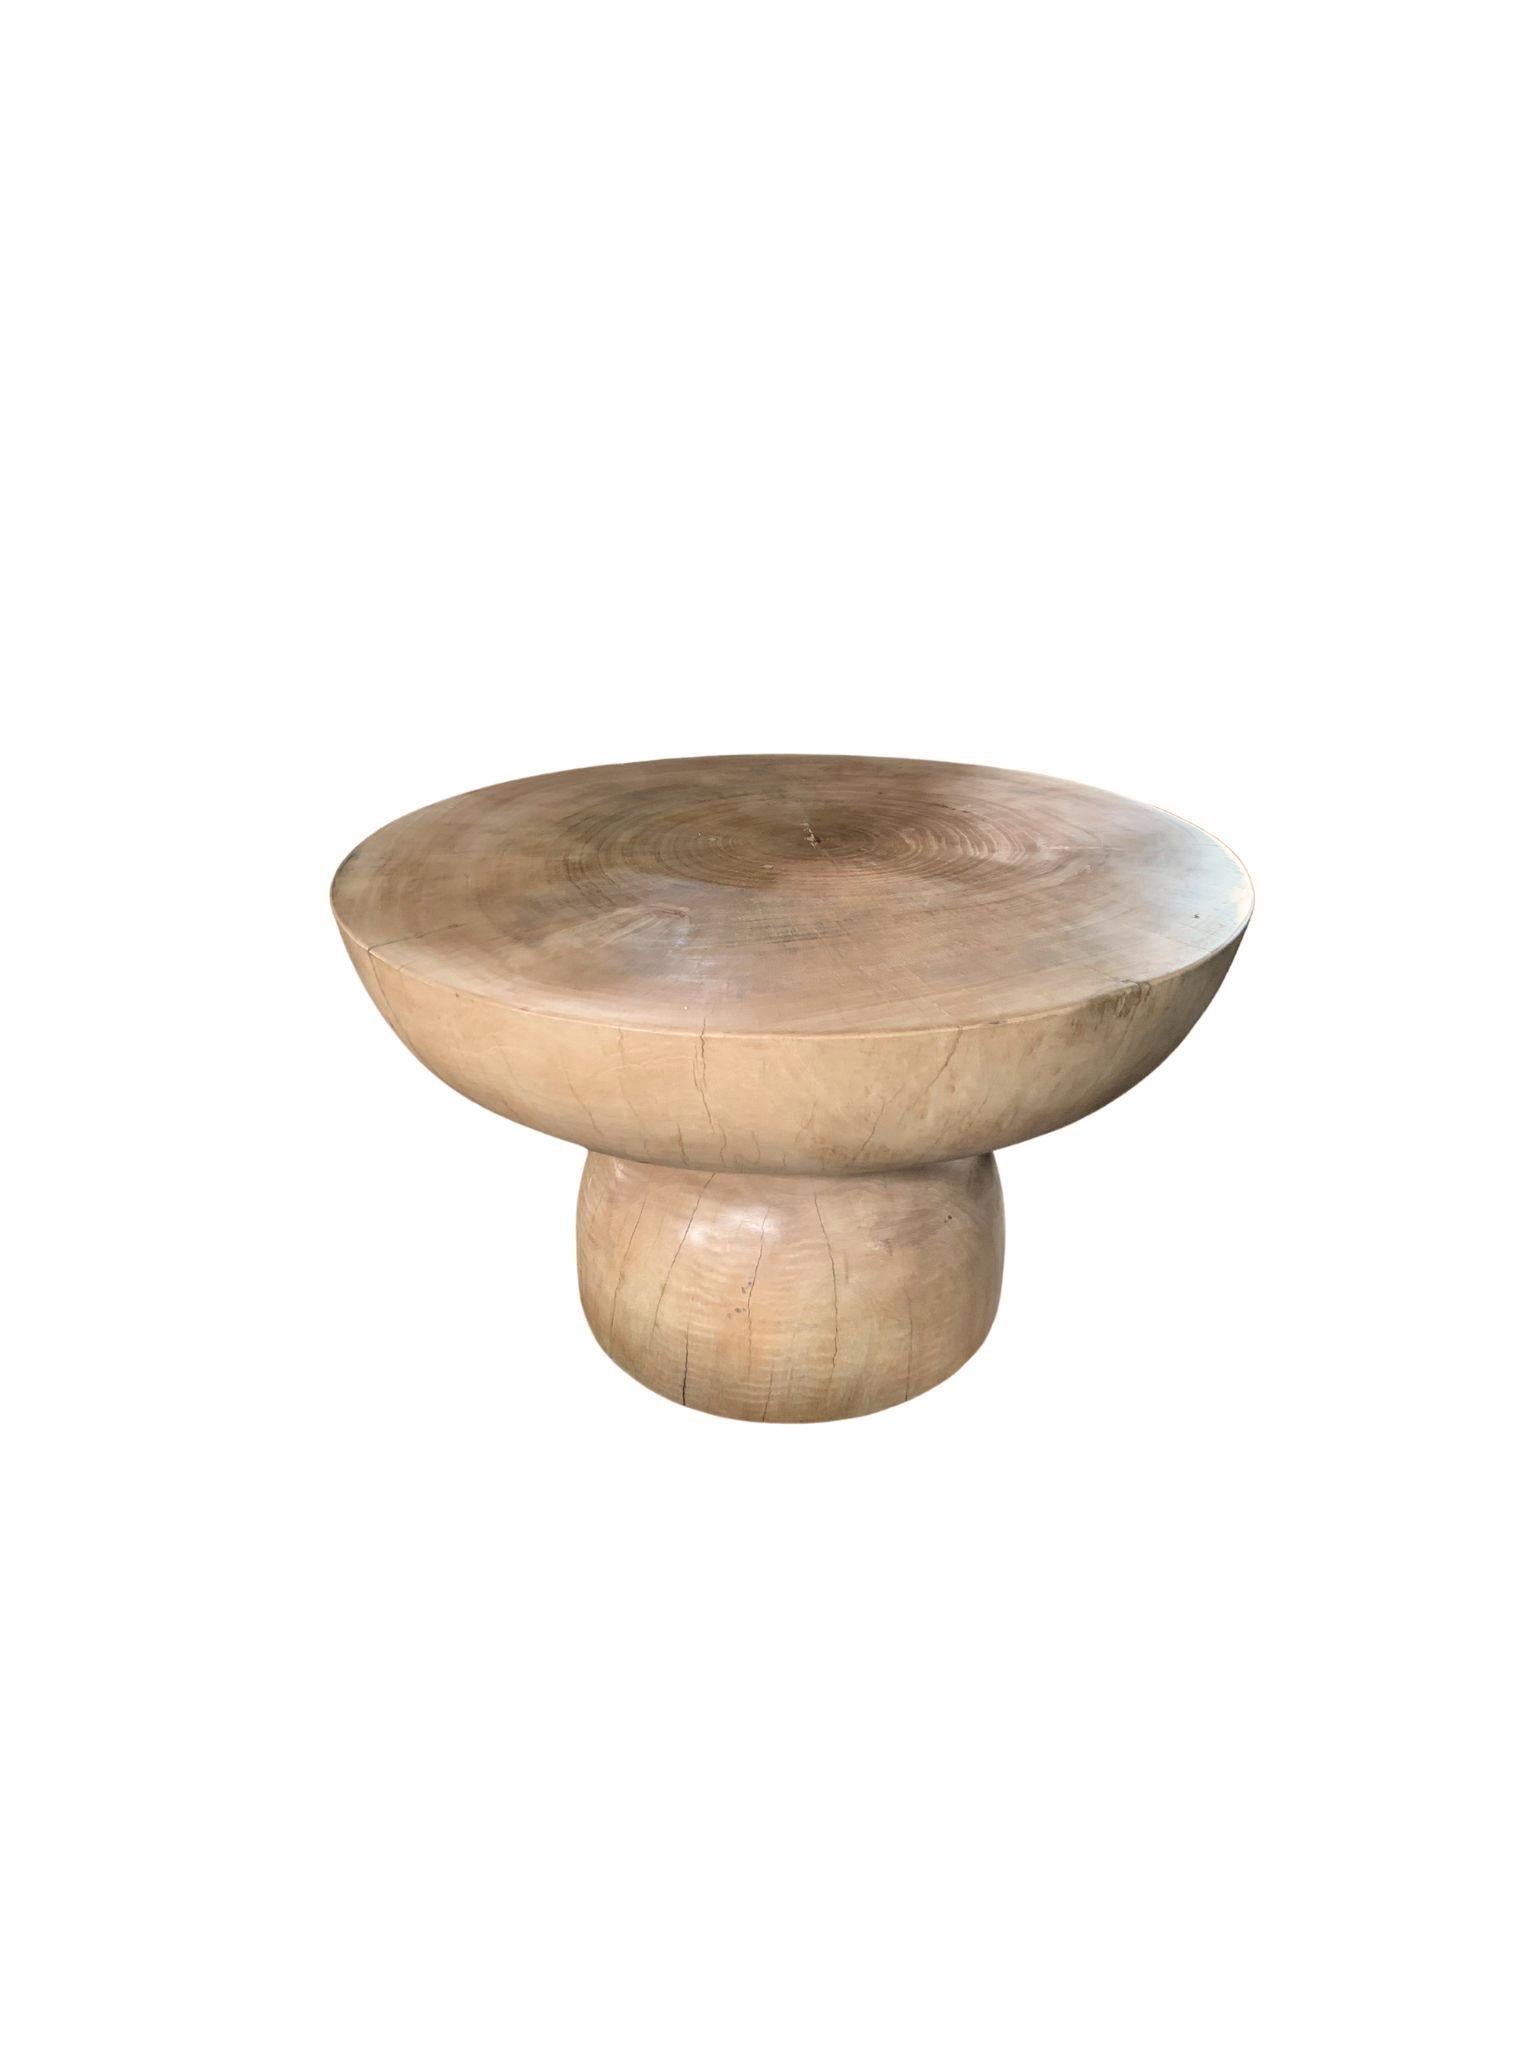 A wonderfully sculptural round side table with a sanded down finish. Its neutral pigment and wood texture makes it perfect for any space. It features a tapered base and large round table top. A uniquely sculptural and versatile piece certain to